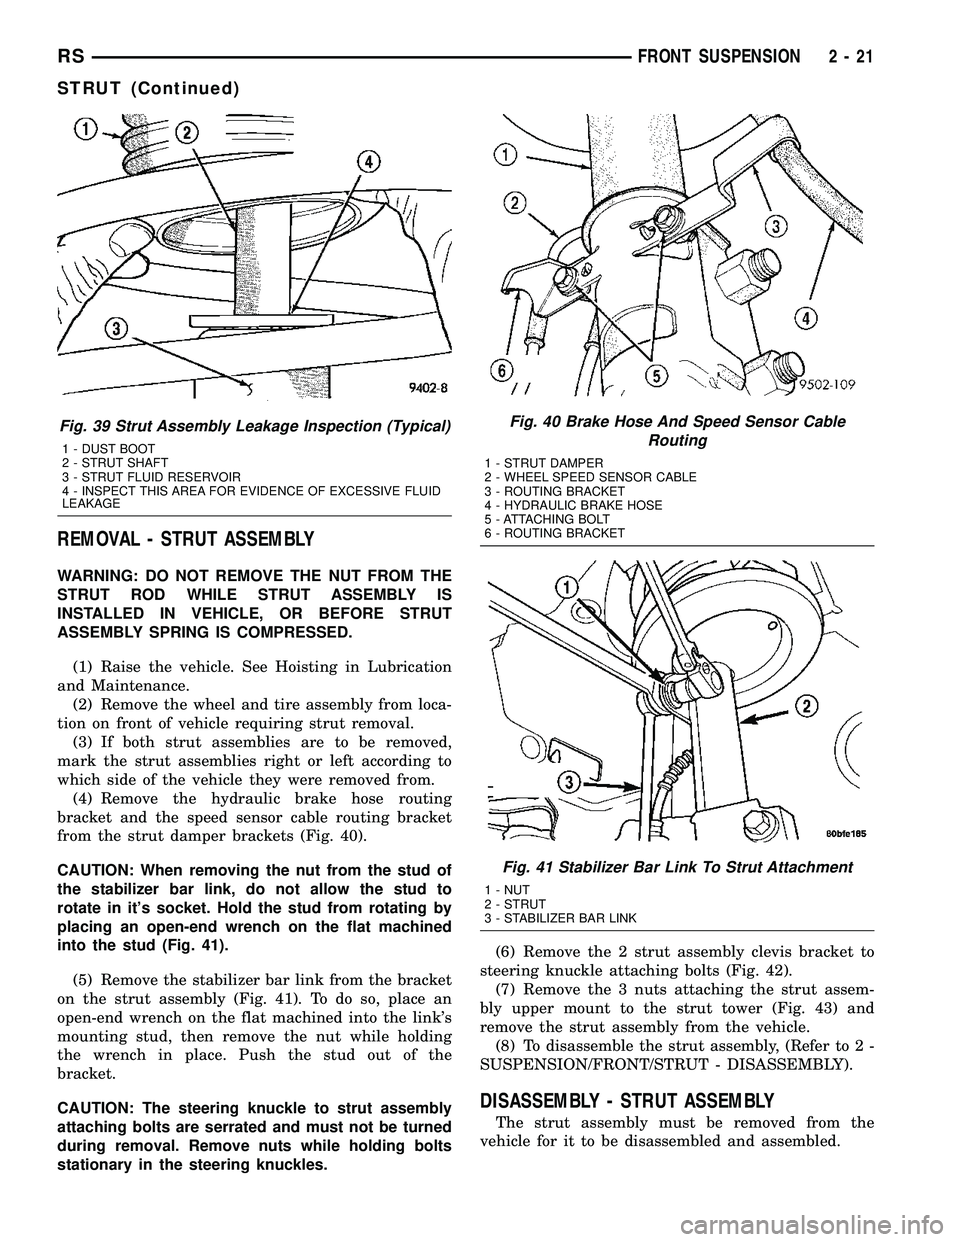 DODGE TOWN AND COUNTRY 2004  Service Manual REMOVAL - STRUT ASSEMBLY
WARNING: DO NOT REMOVE THE NUT FROM THE
STRUT ROD WHILE STRUT ASSEMBLY IS
INSTALLED IN VEHICLE, OR BEFORE STRUT
ASSEMBLY SPRING IS COMPRESSED.
(1) Raise the vehicle. See Hoist